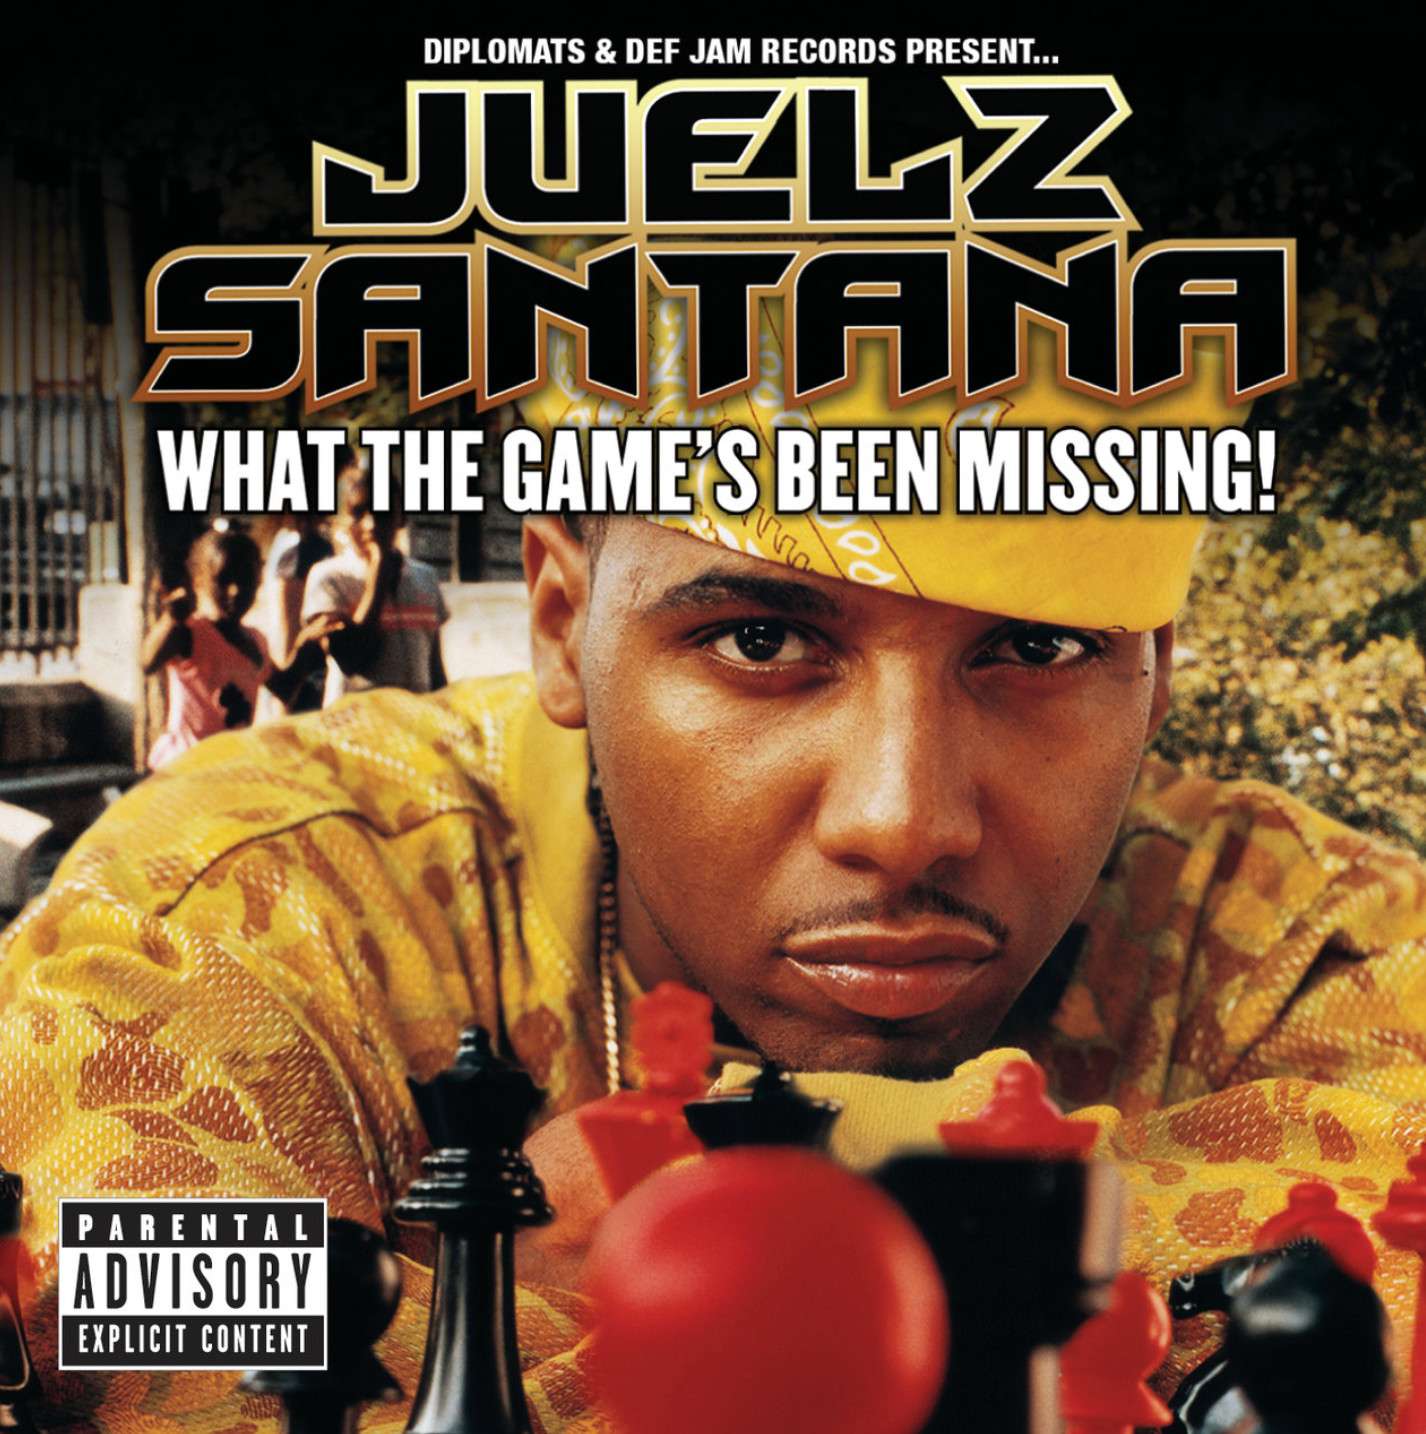 Juelz Santana Had A Hit With “There It Go (The Whistle Song)”